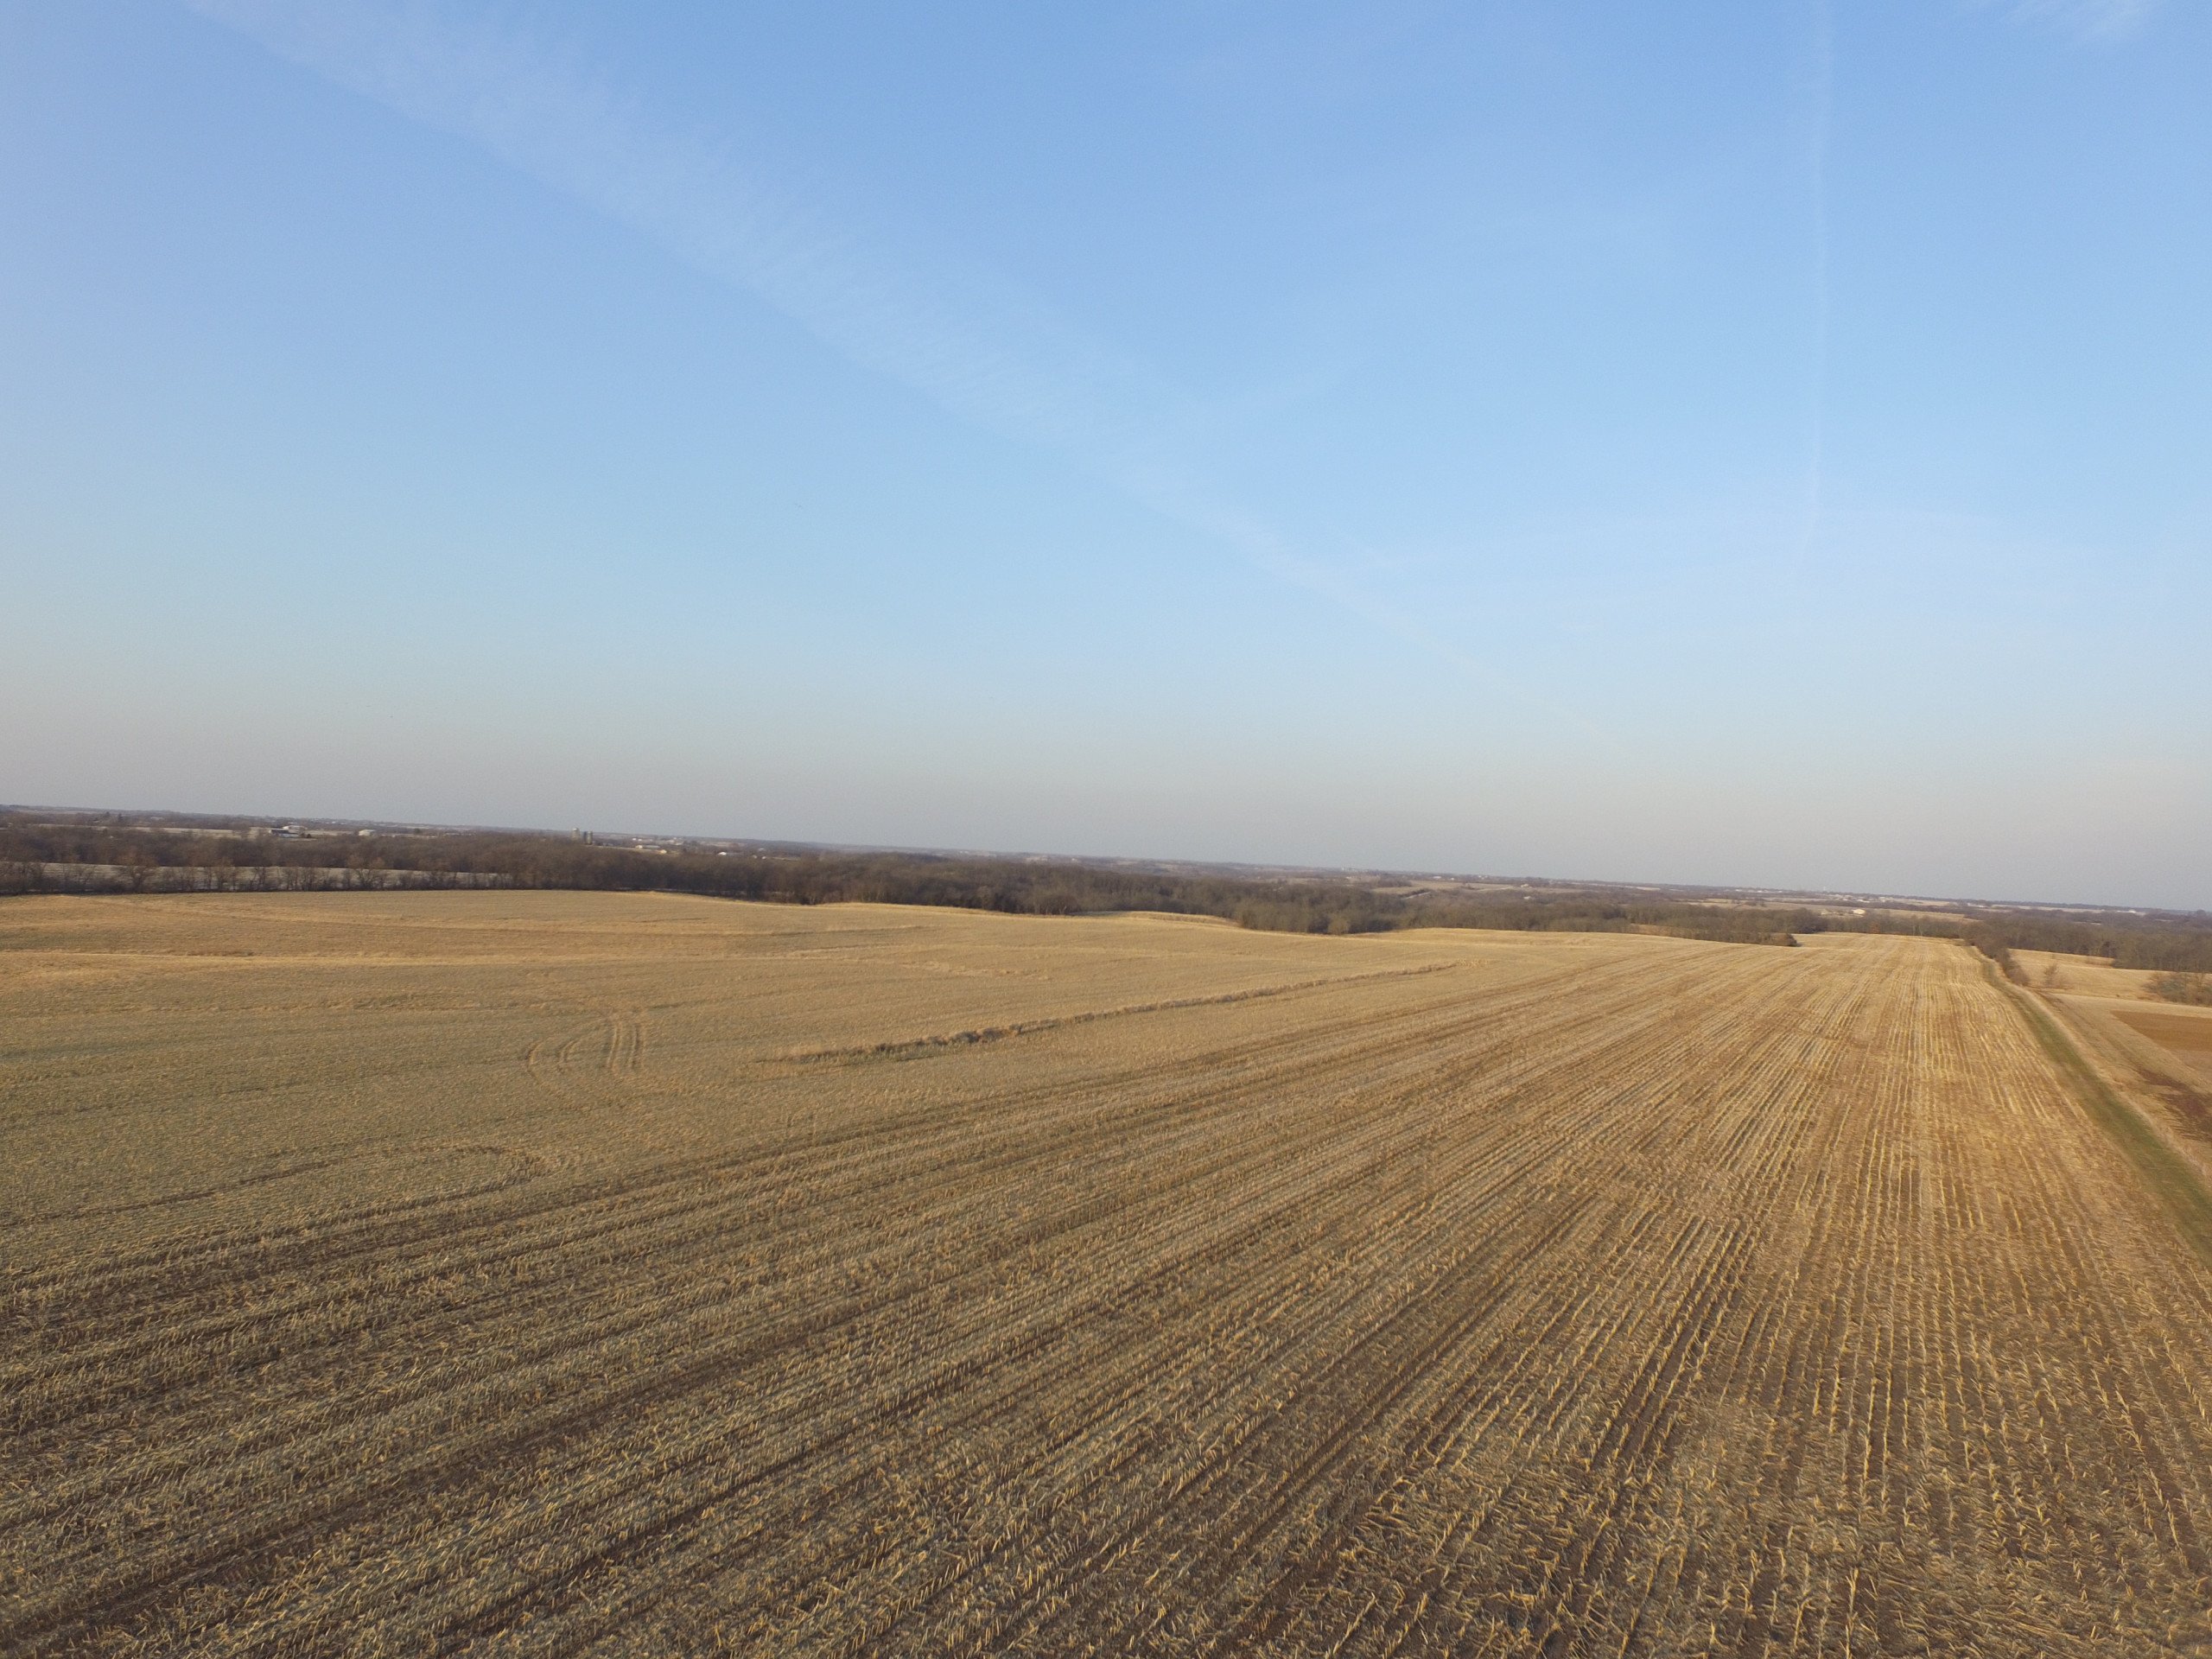 land-marion-county-iowa-86-acres-listing-number-16742-DJI_0019 - Copy-2.jpg